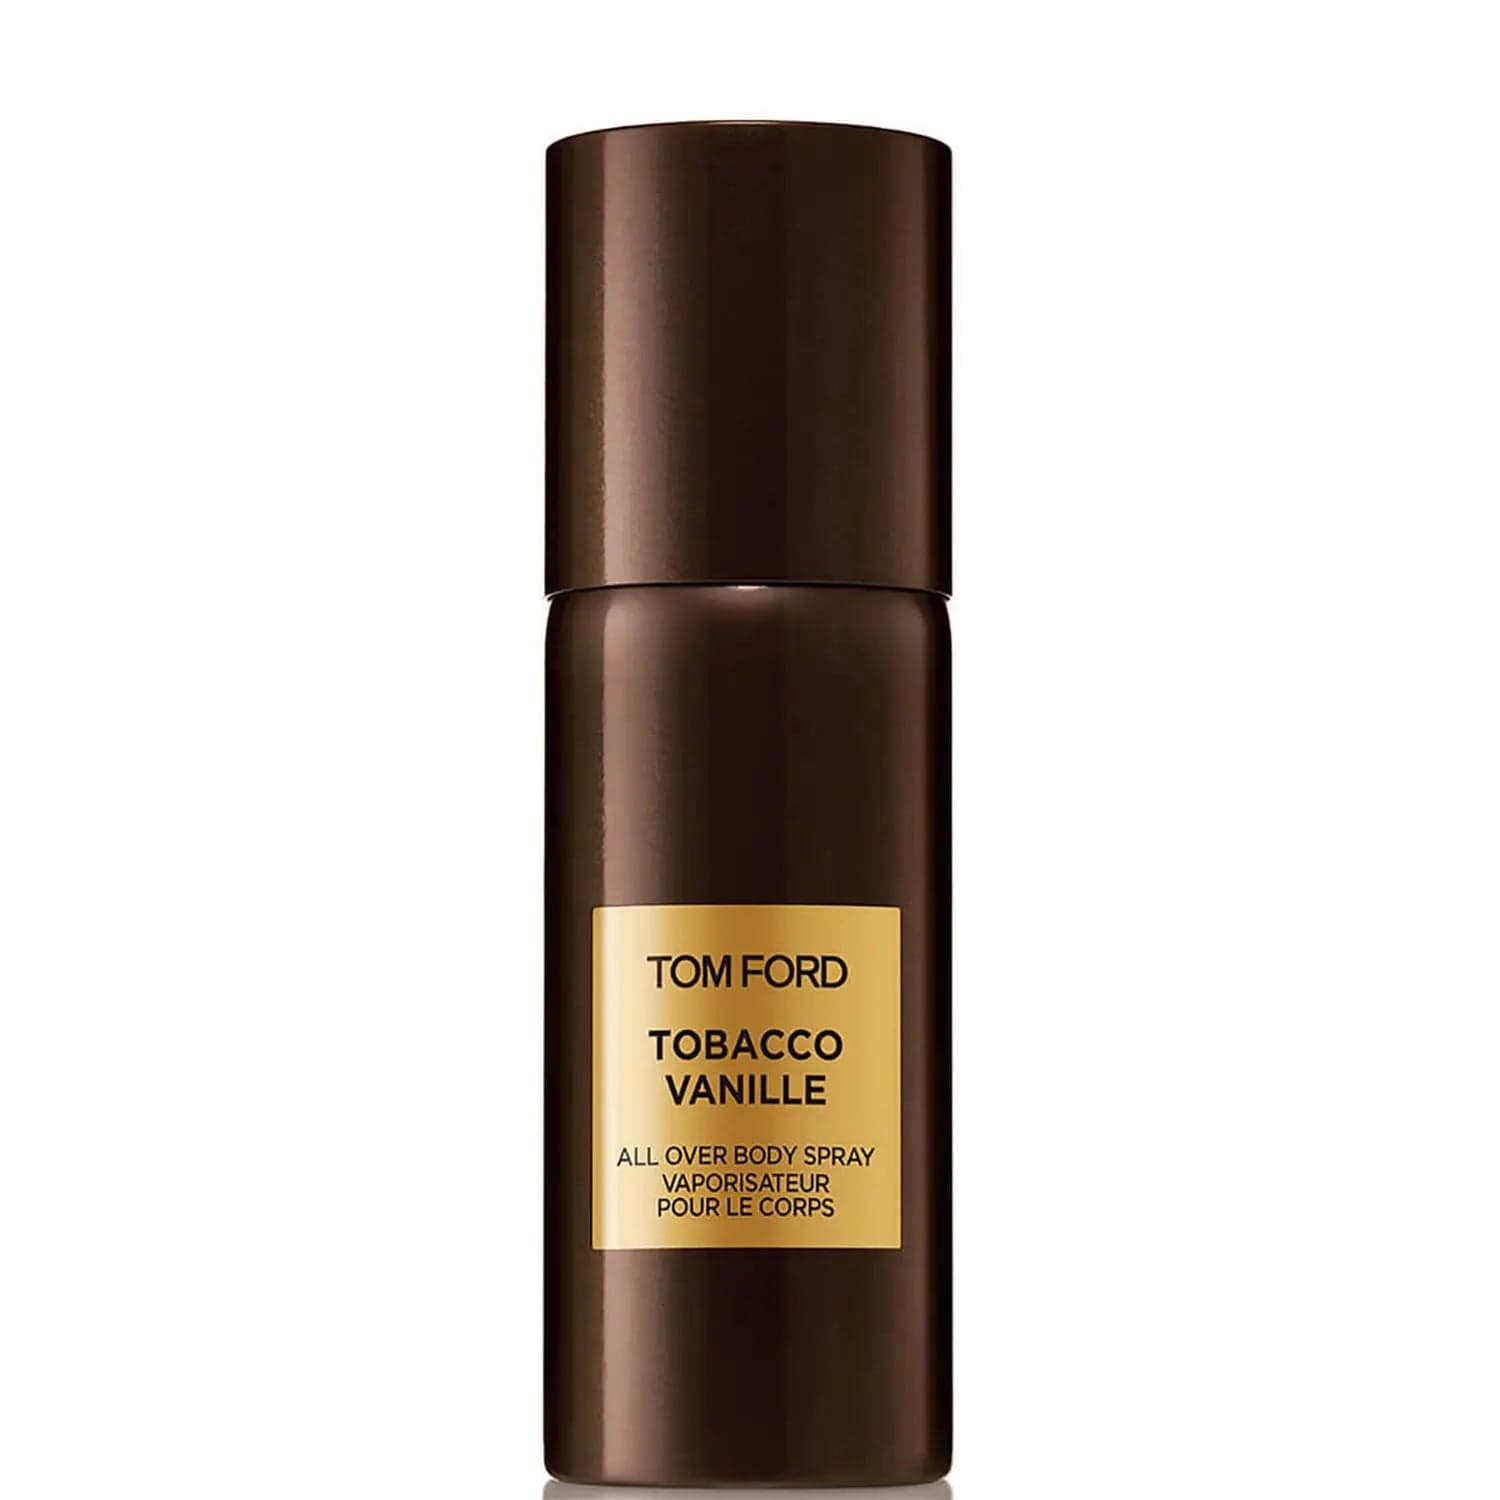 Tom Ford obacco Vanille All Over Body Spray 150ml